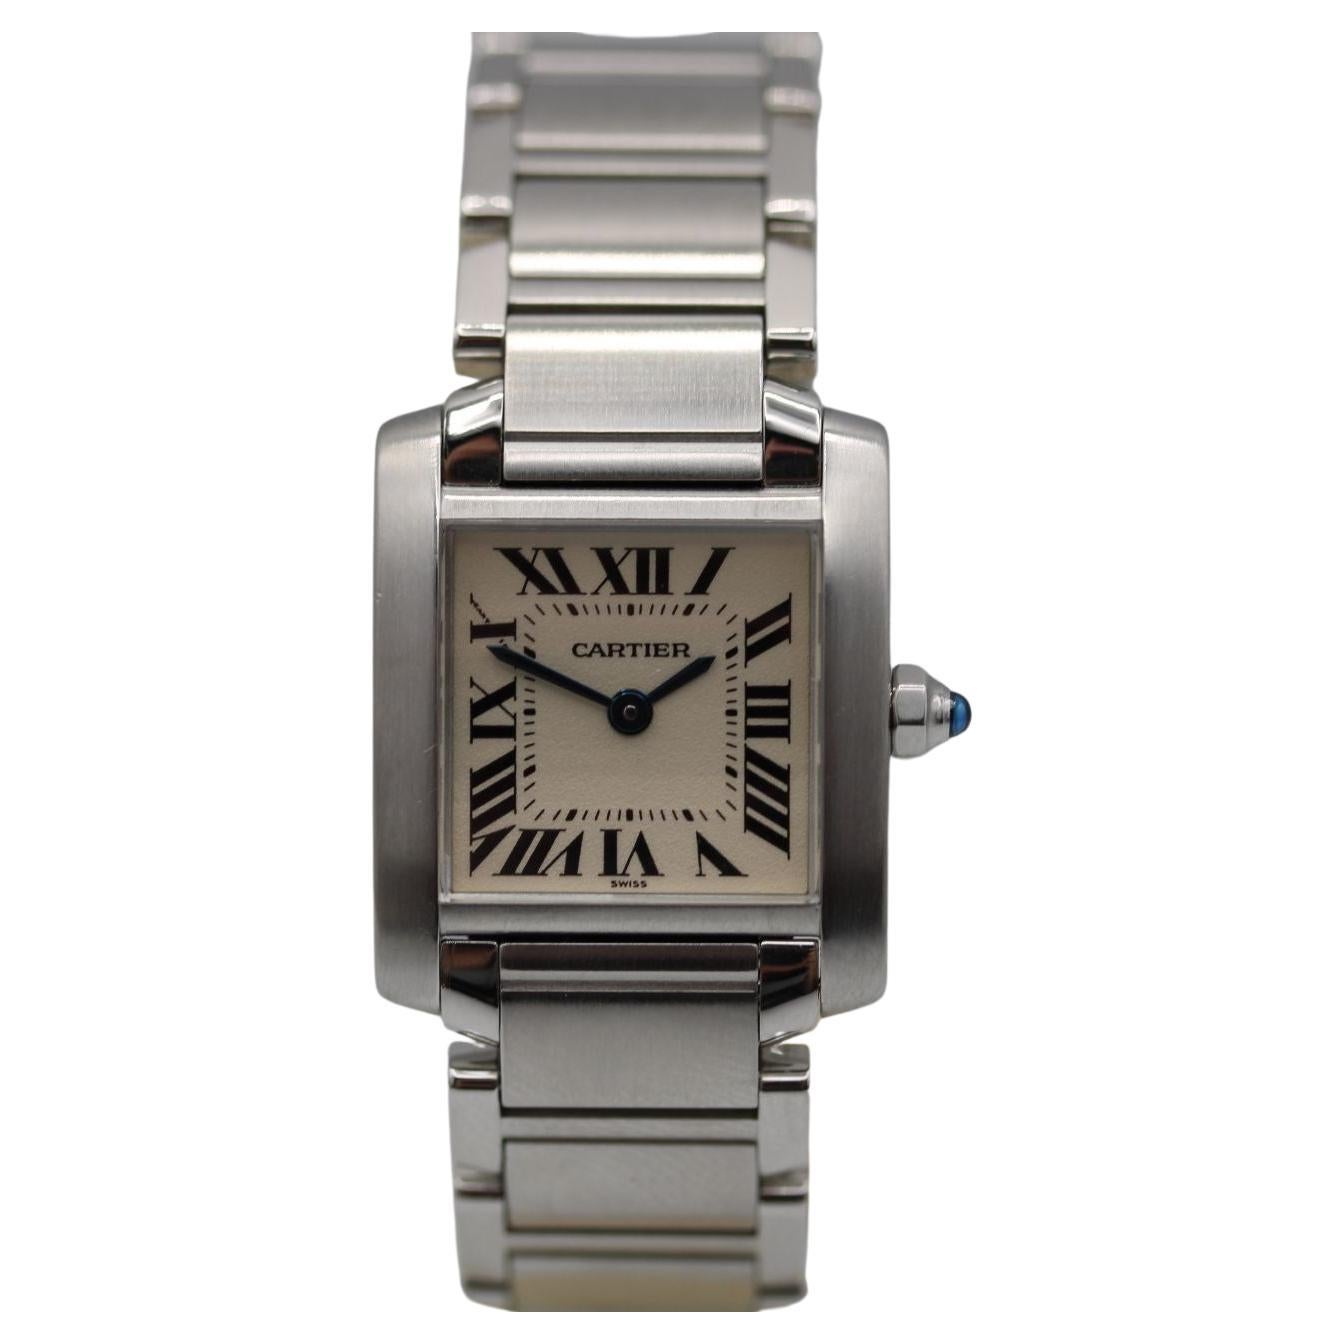 This elegant Cartier Tank Francaise is presented with a Cartier holder, manuals and warranty papers dated 1997 in addition to our 12-month warranty.

The Cartier Tank Francaise, model 2300, is a classy timepiece suitable for any occasion. It